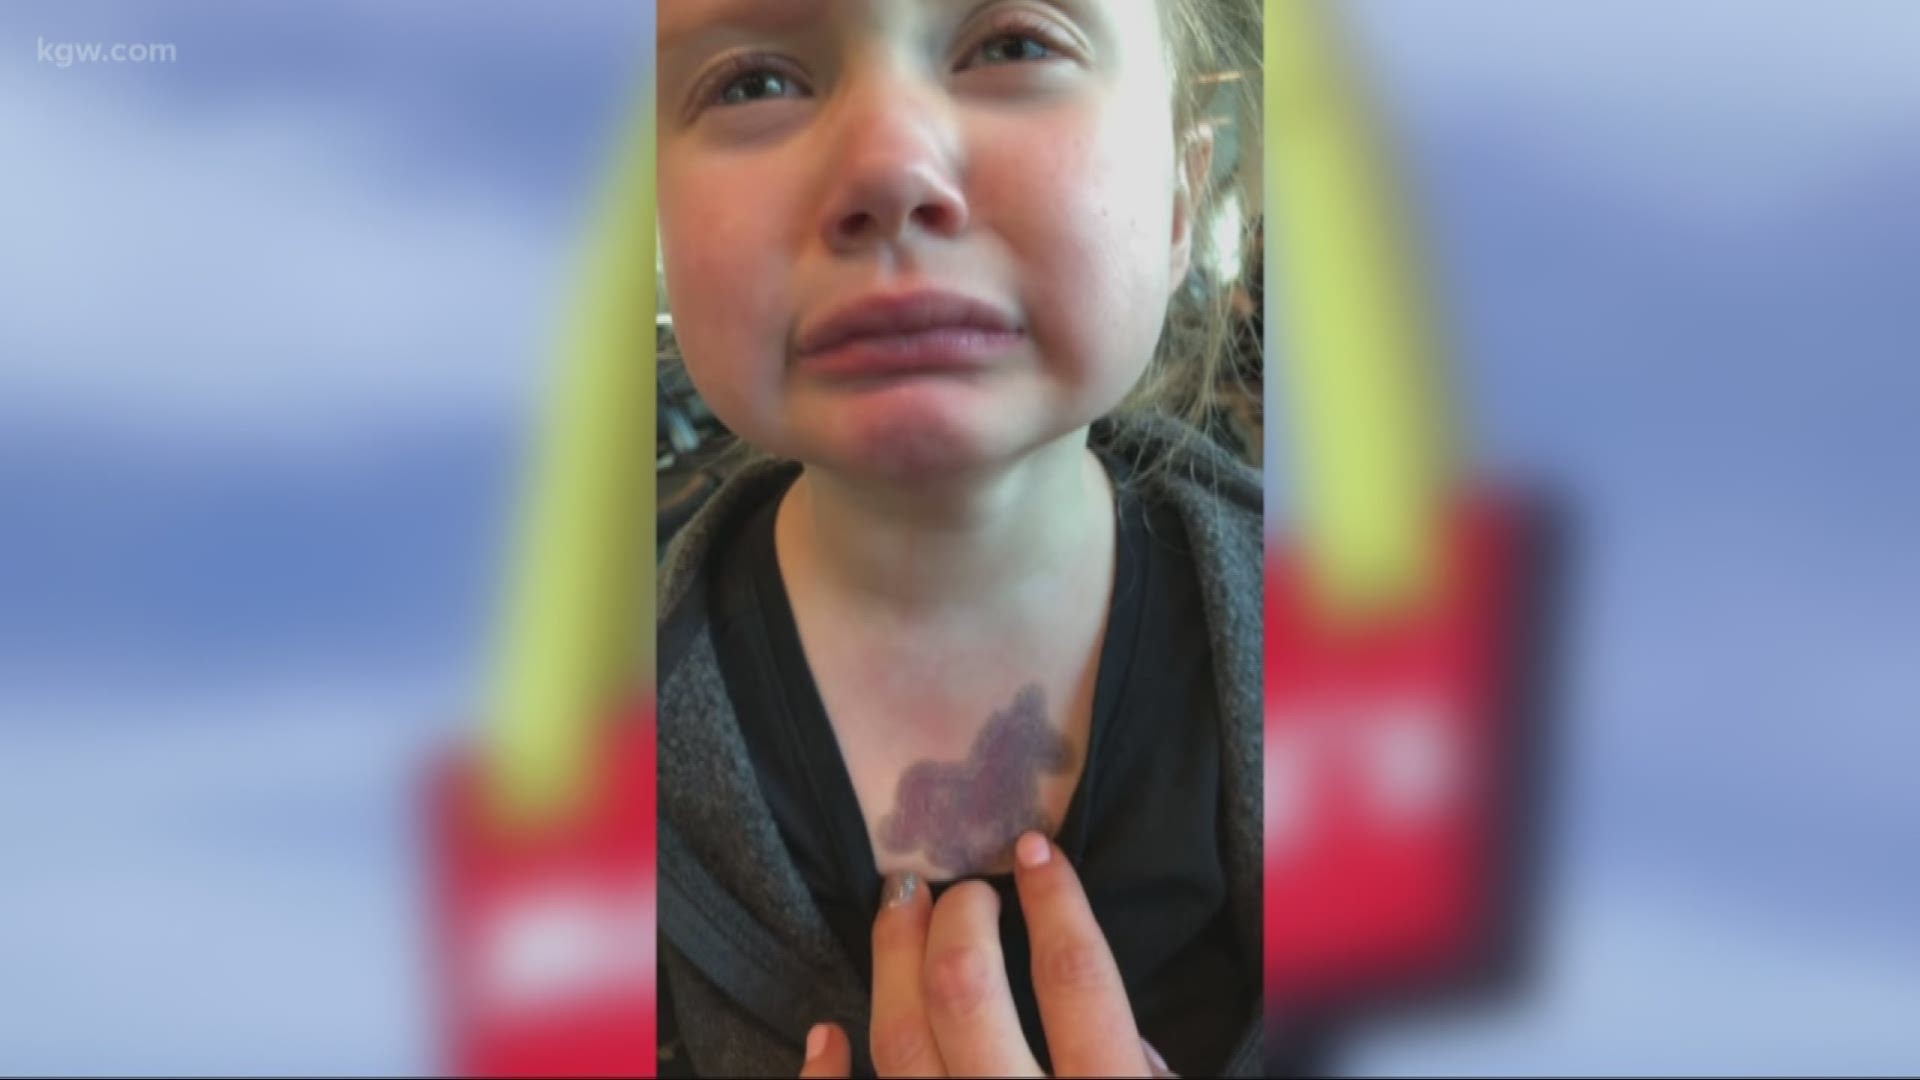 Emily Dolbeer and four-year-old Lainey were at the airport on the way to Disneyland when she tried to take a sip. "It was hotter than I would have drank coffee or tea or anything it was absolutely burning," mother Emily said.